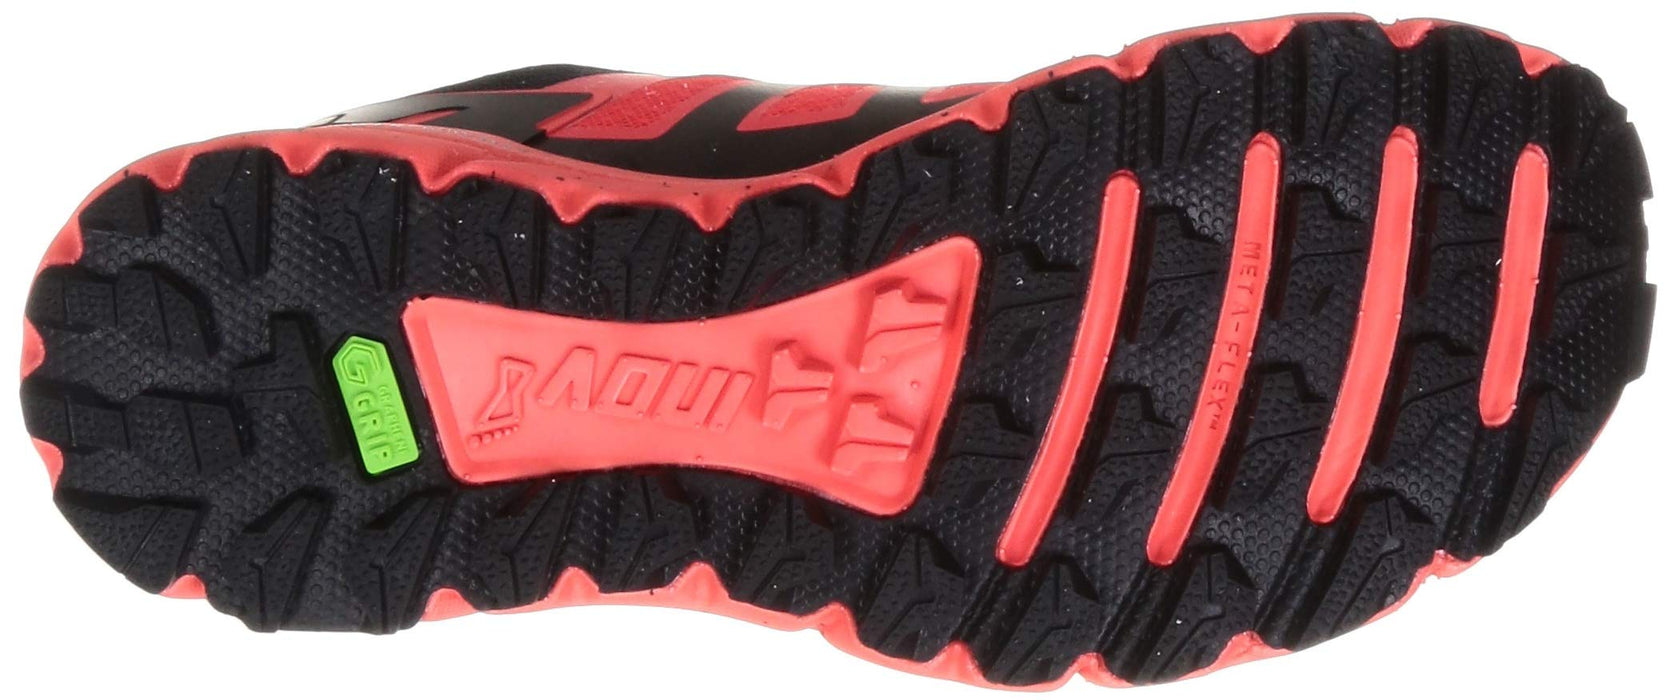 Inov-8 Terraultra G270 Coral/Black Women's Size 10.5 Trail Running Shoes